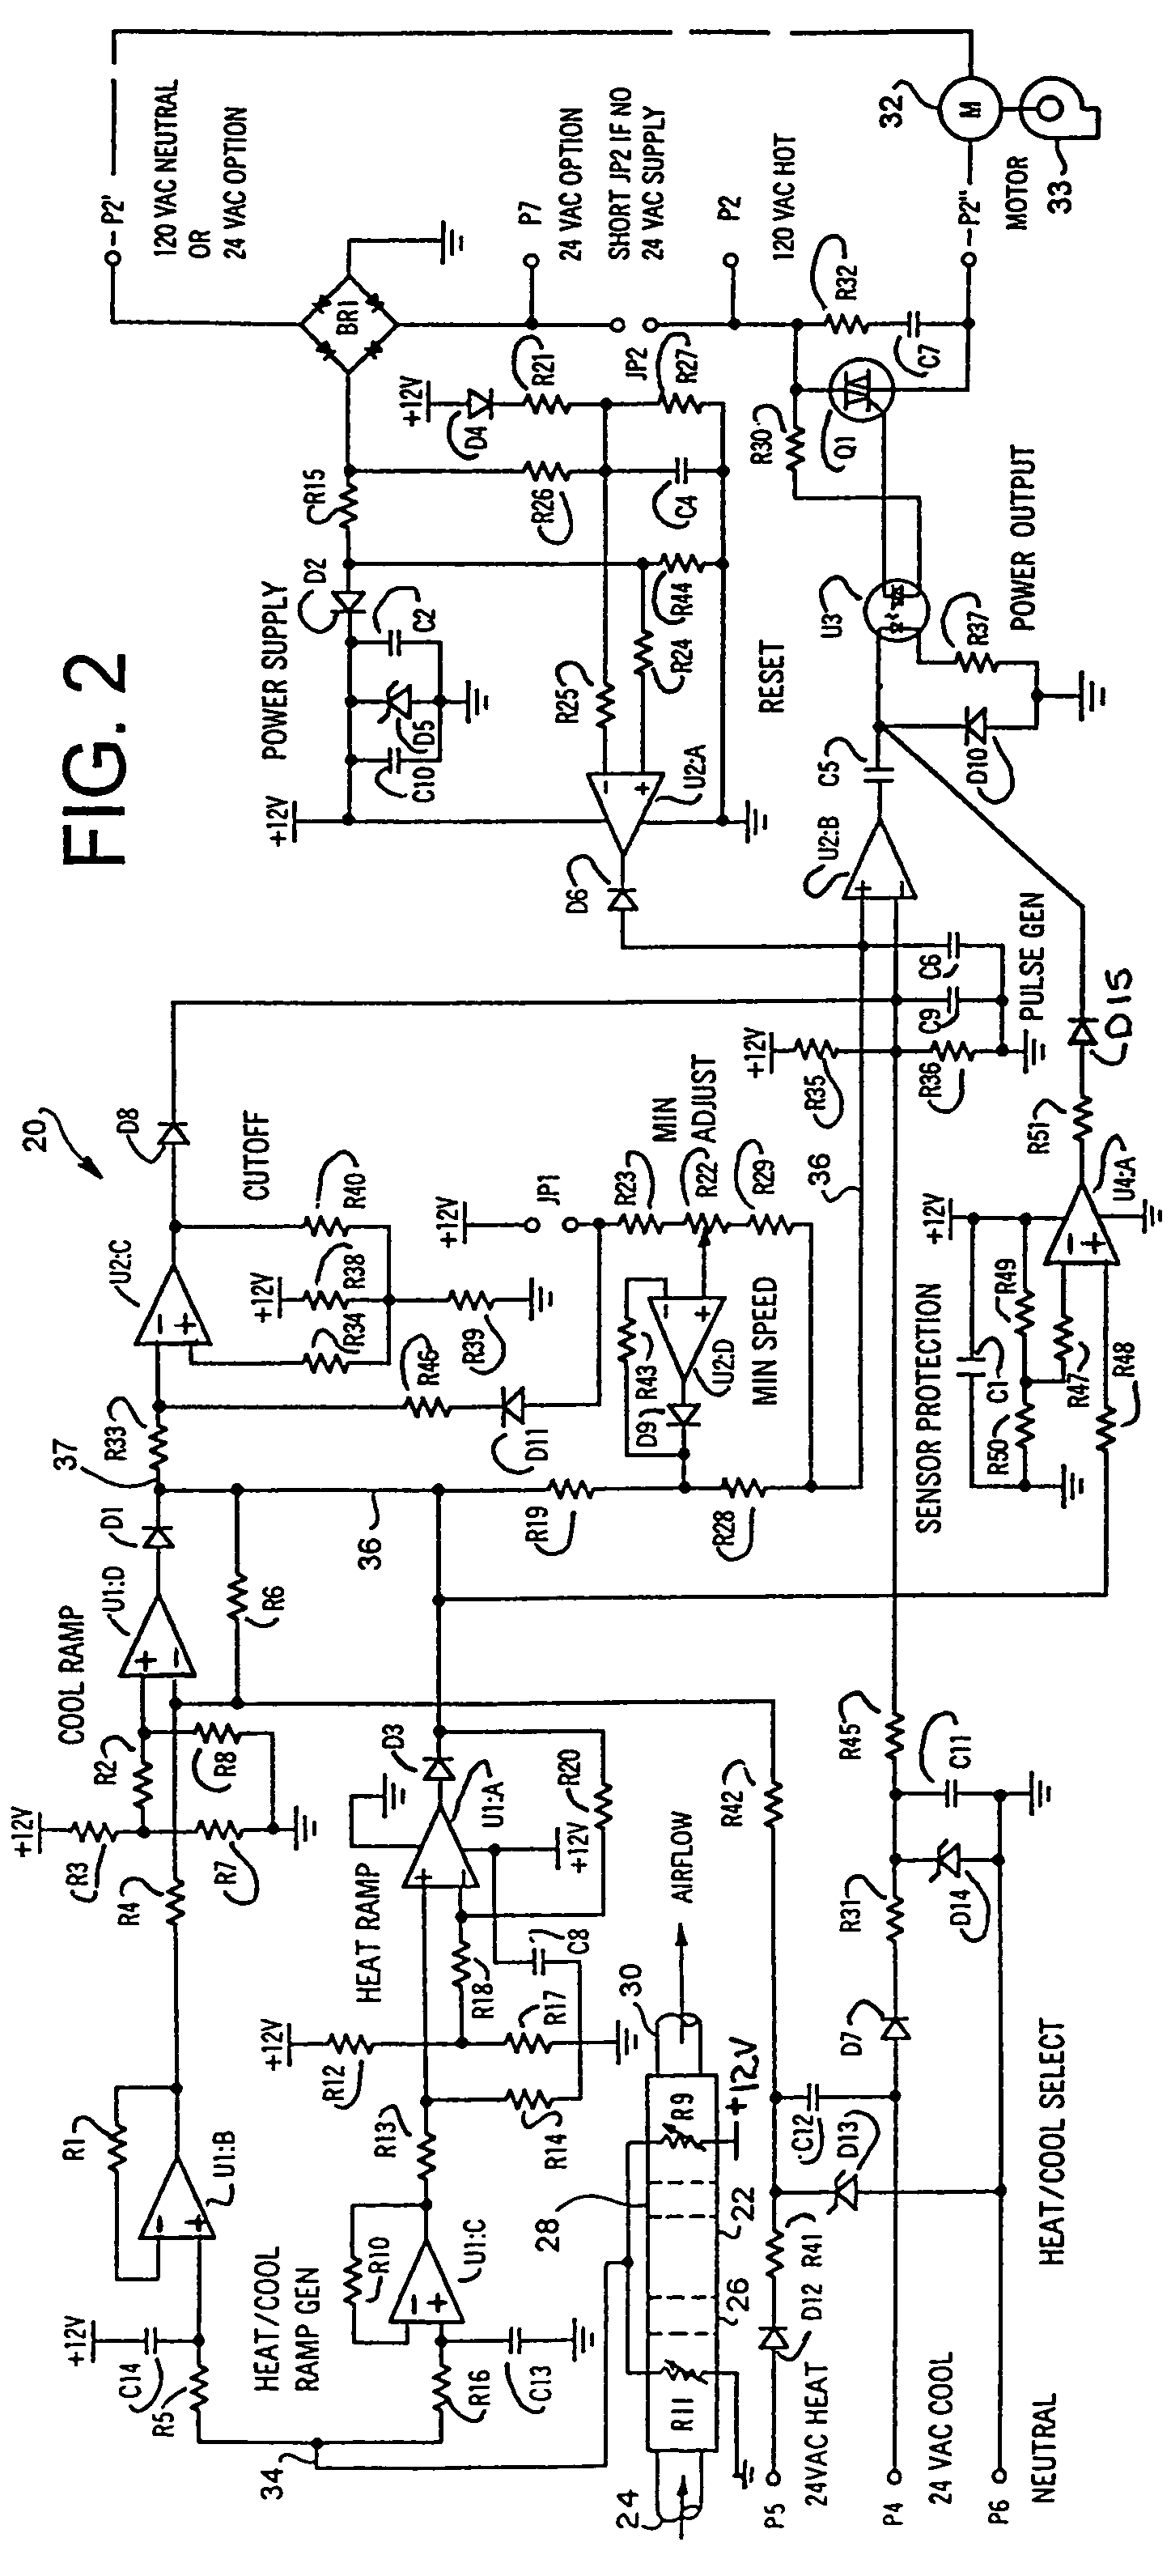 Variable speed fan motor control for forced air heating/cooling system